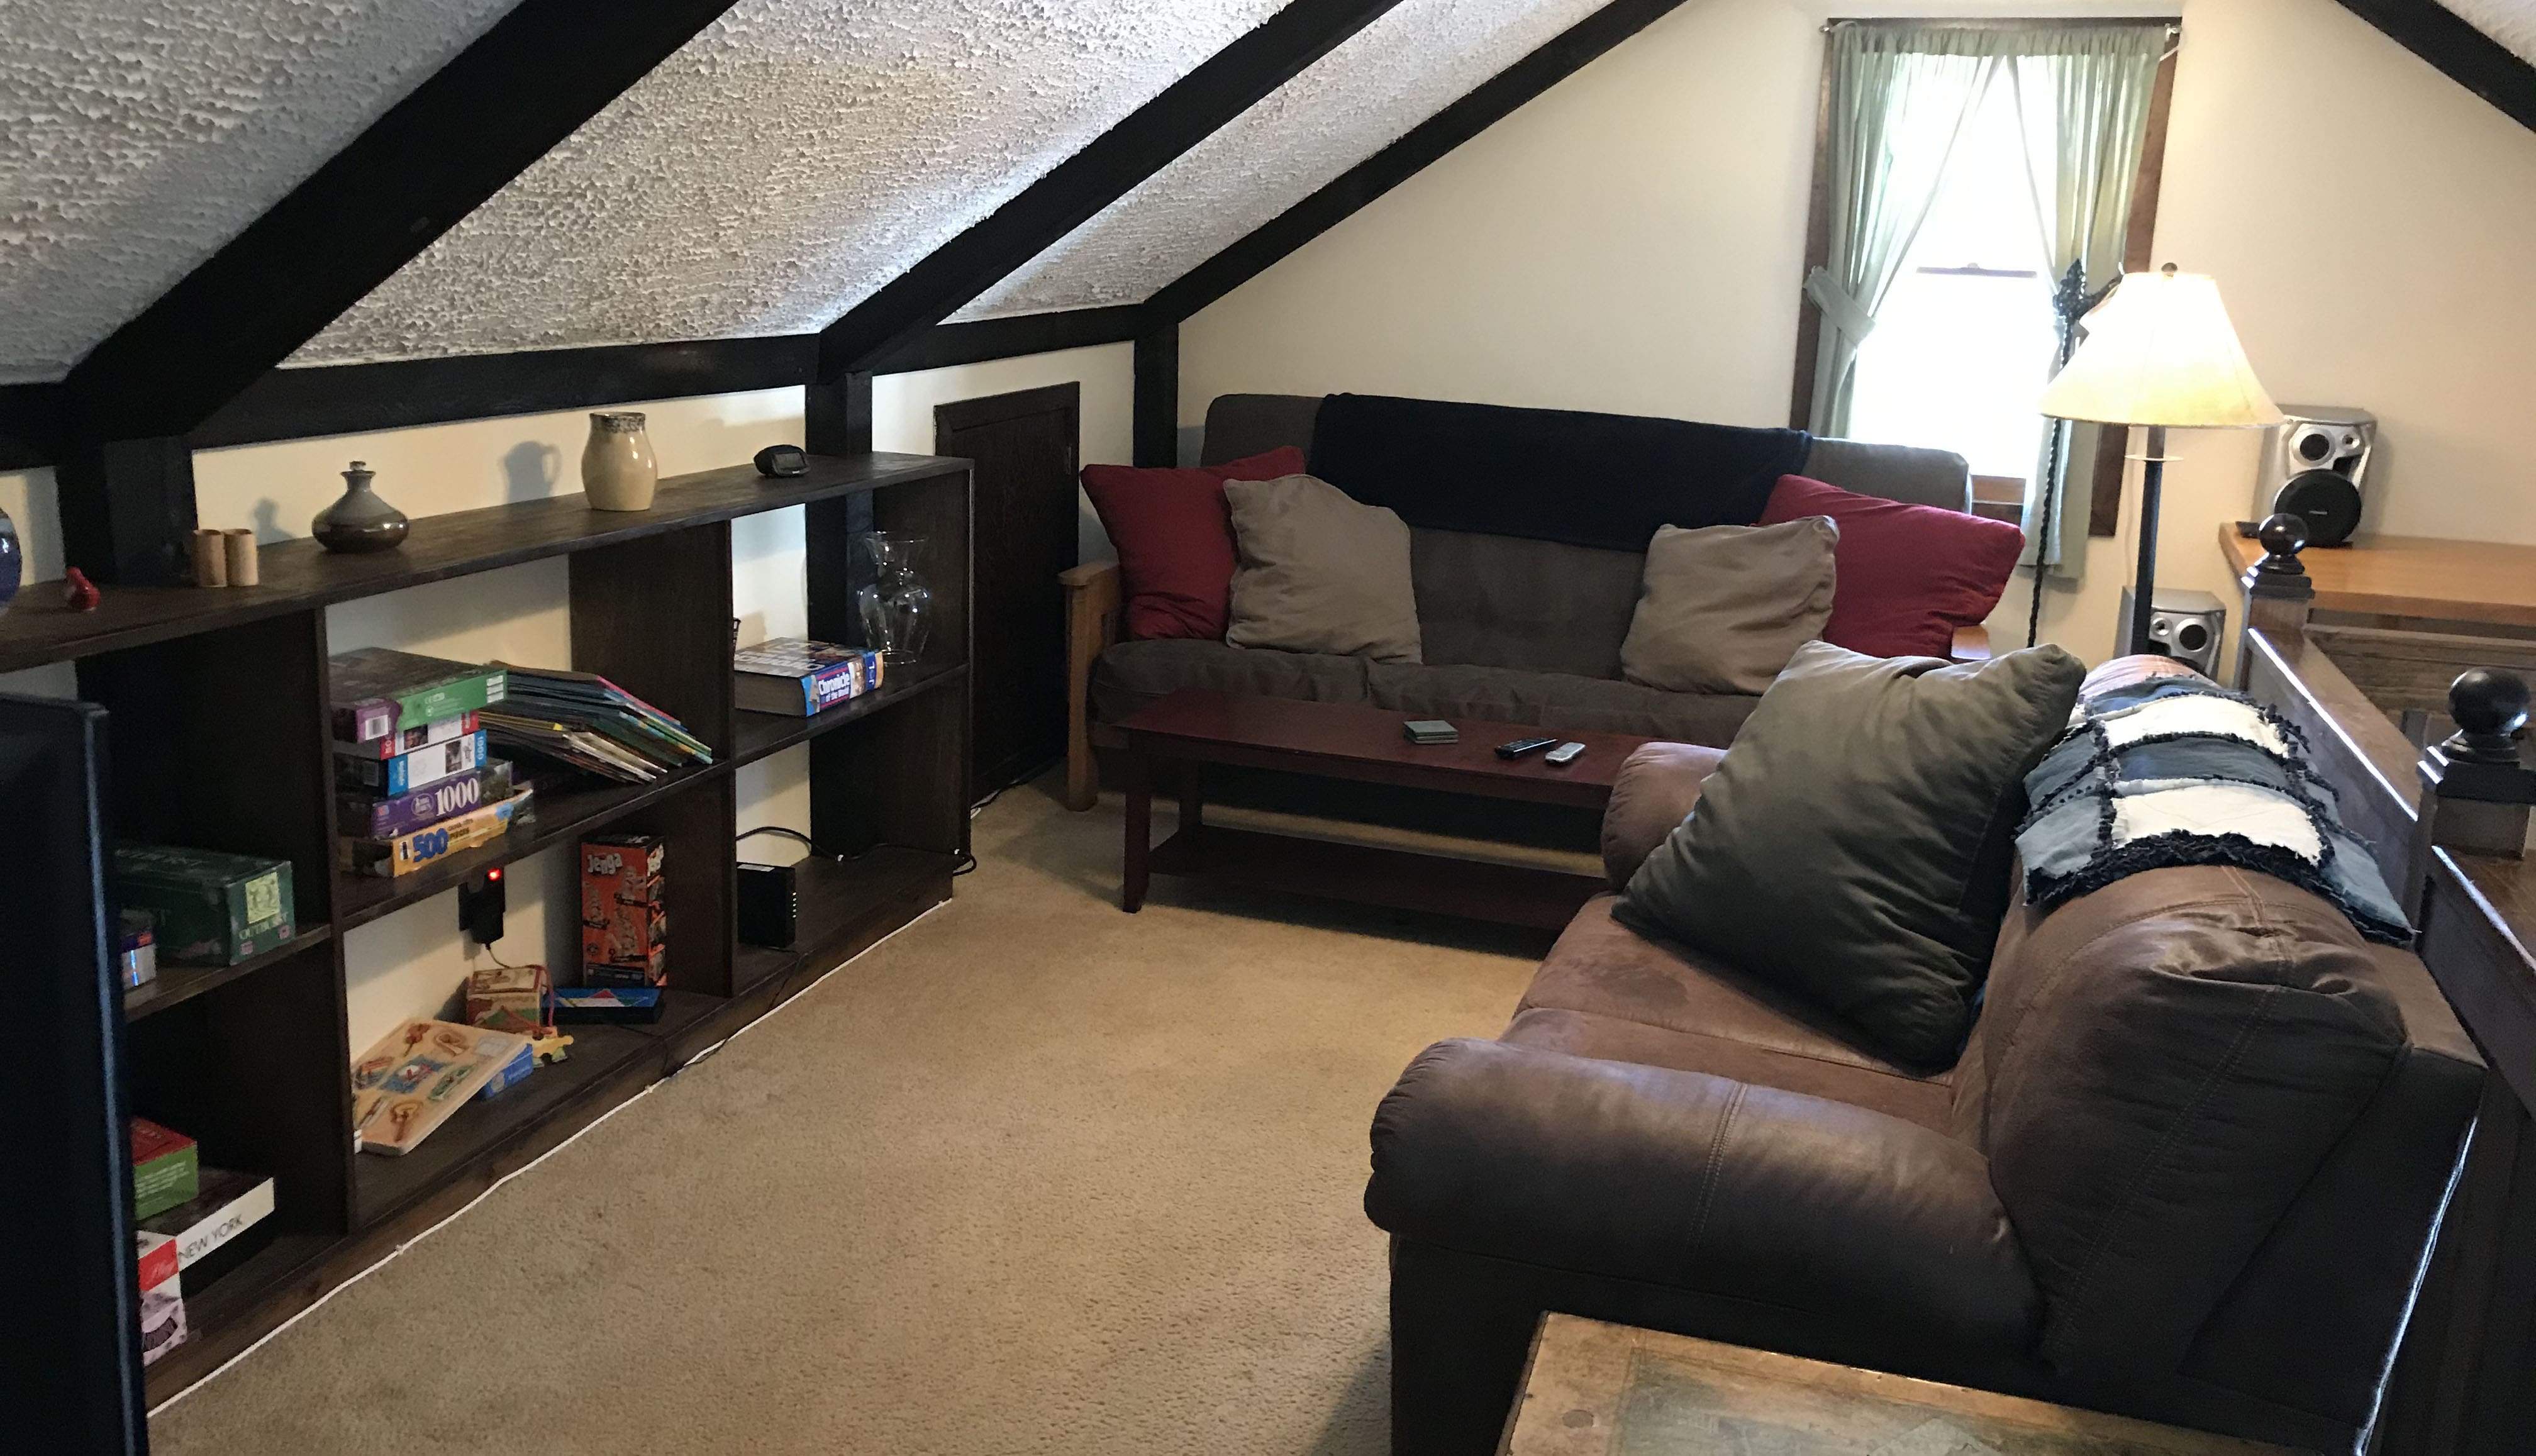 Loft area for games, reading, movies, relaxing!